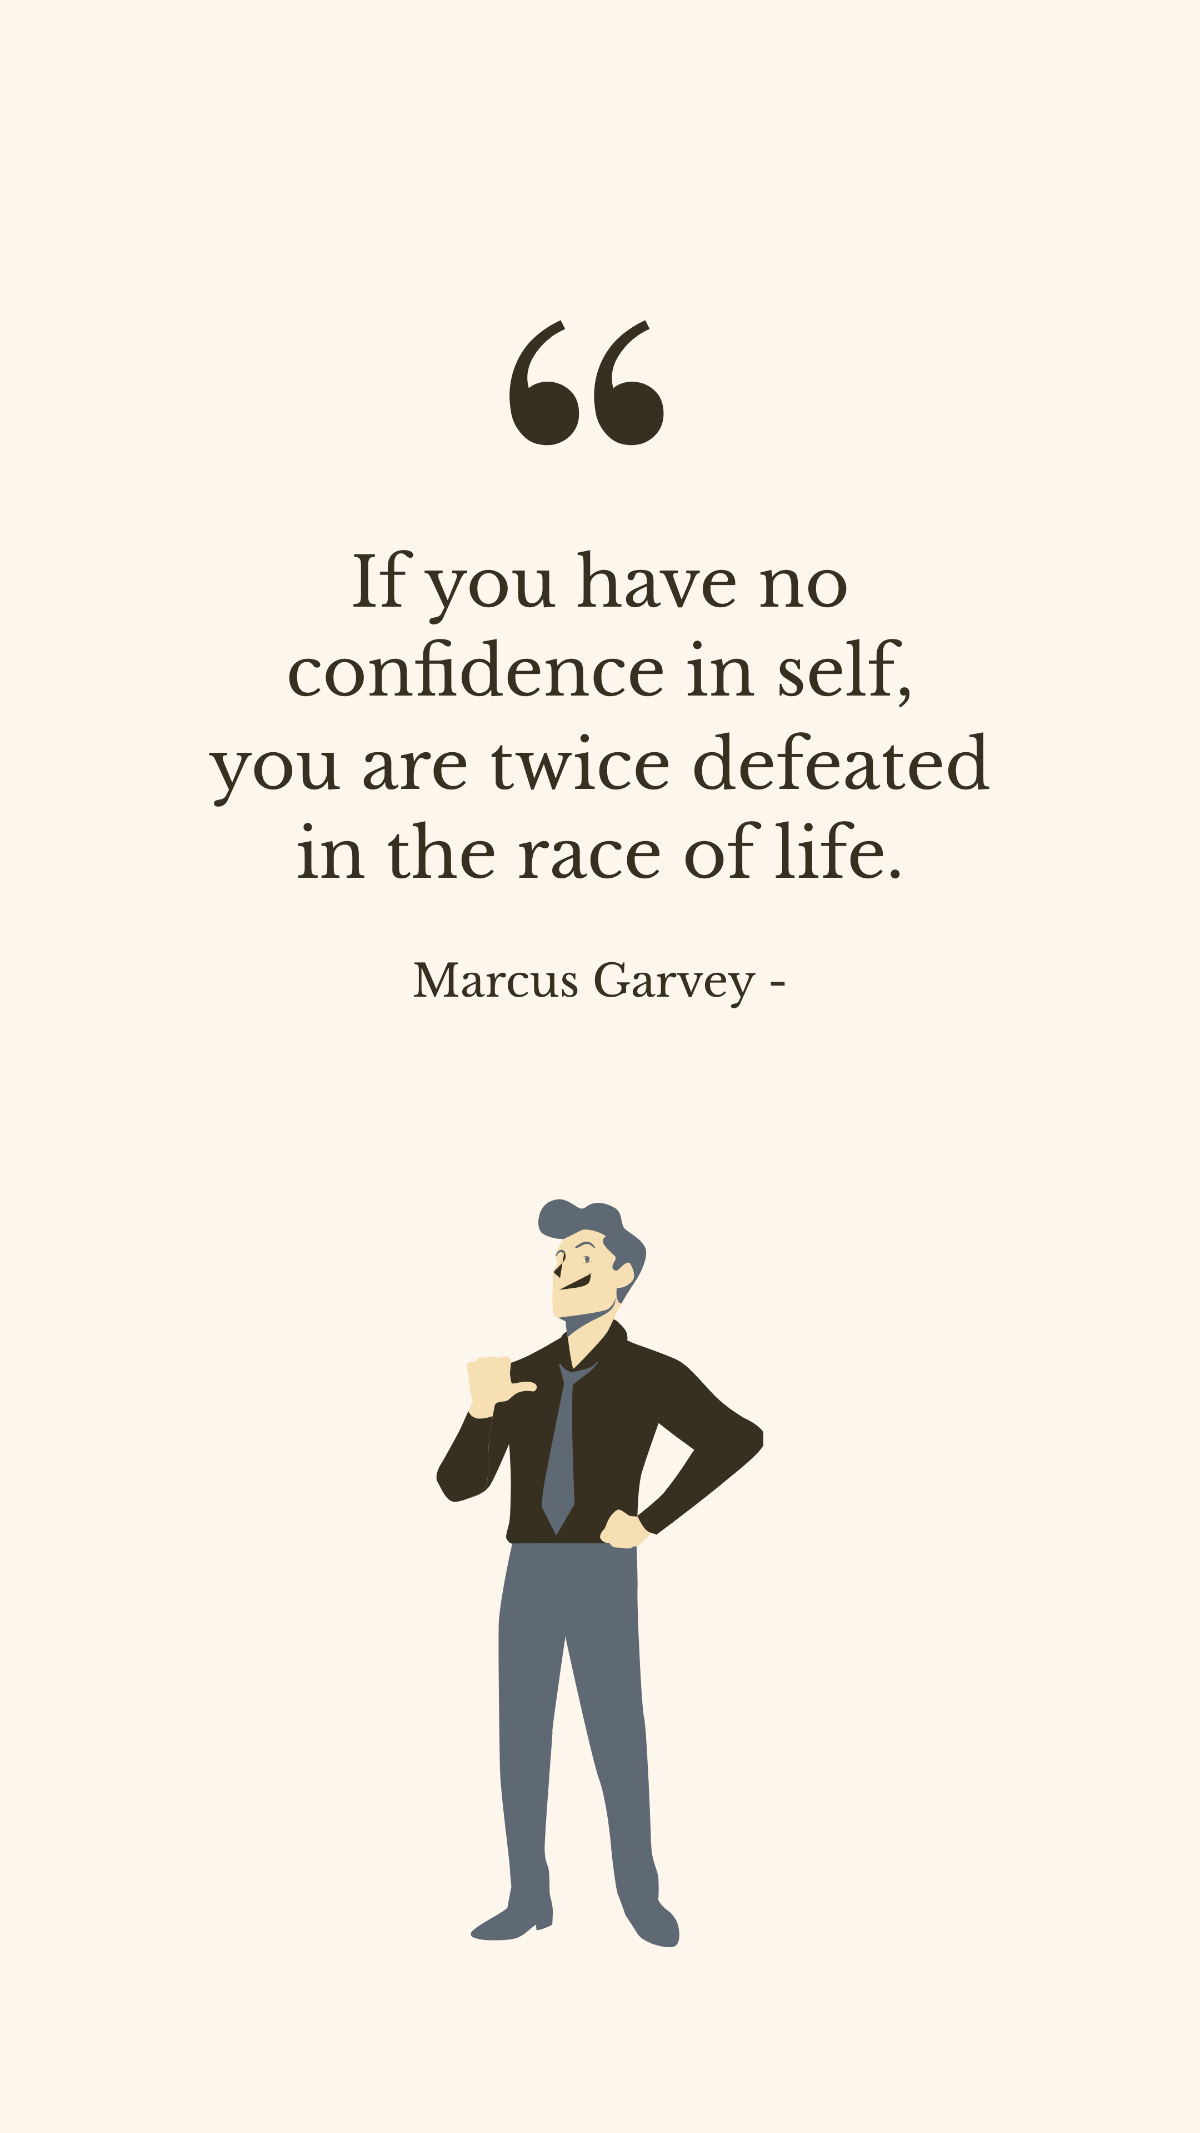 Marcus Garvey - If you have no confidence in self, you are twice defeated in the race of life. Template